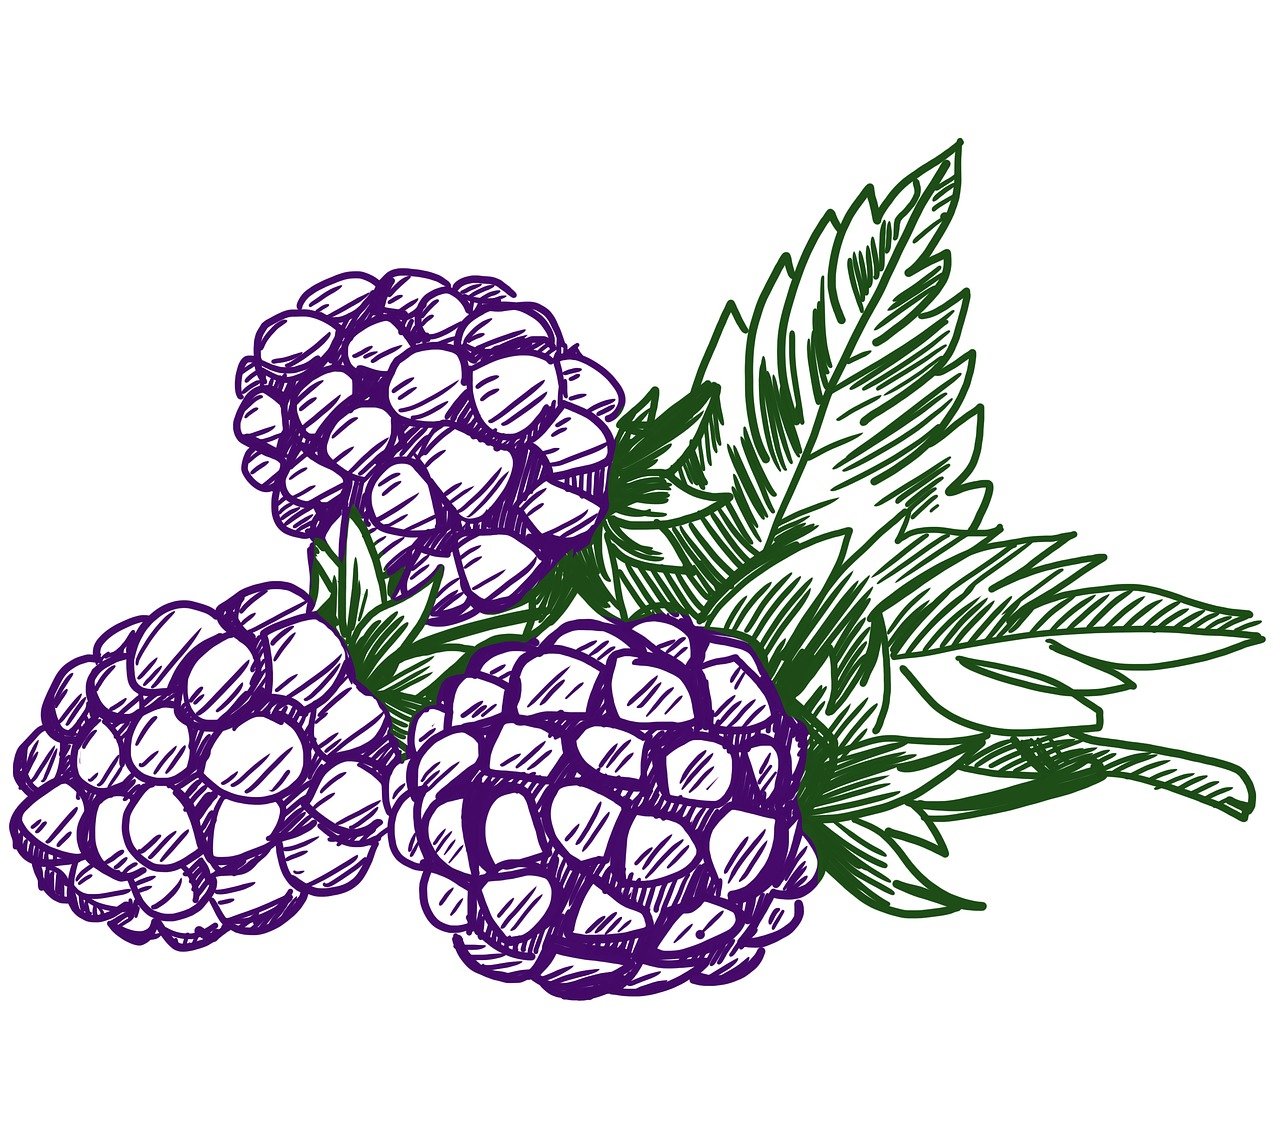 two raspberries with leaves on a white background, an illustration of, by Ayako Rokkaku, process art, purple color, colored woodcut, burberry, evangelionic illustration